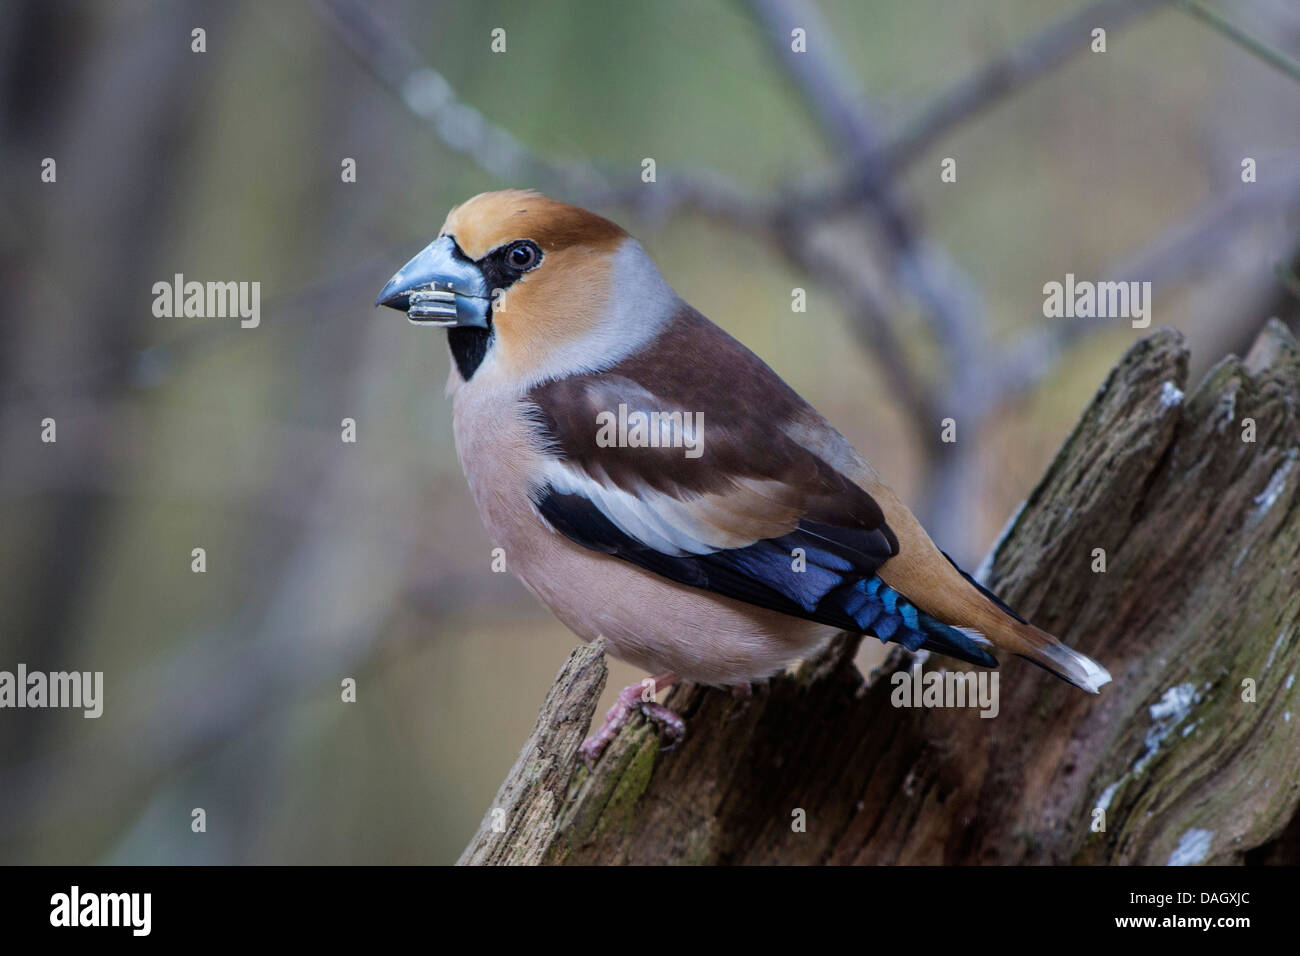 hawfinch (Coccothraustes coccothraustes), male feeding a sunflower seed, Germany, Bavaria Stock Photo